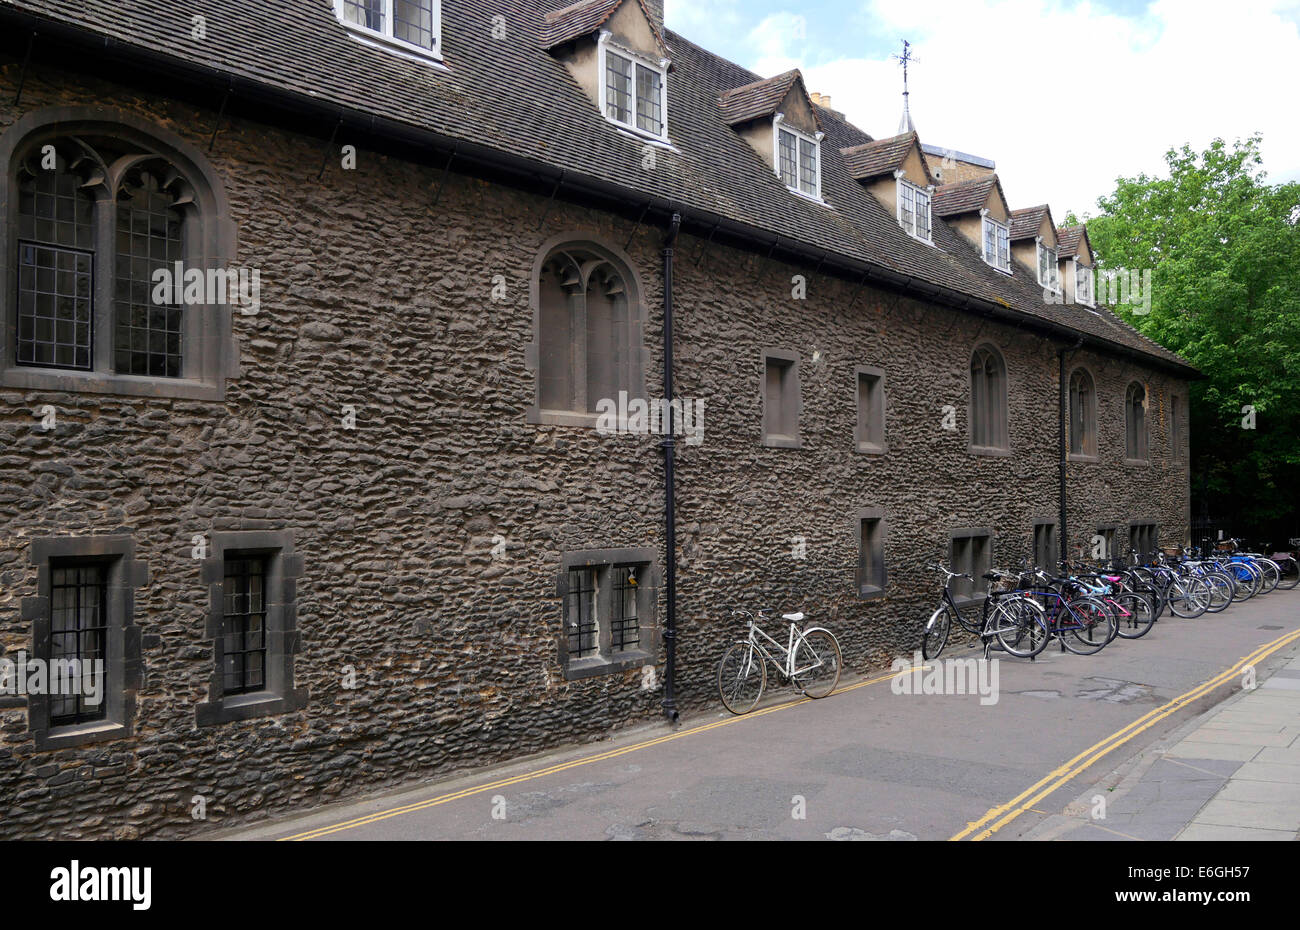 Ancient walls and bicycles in Free School Lane, central Cambridge, England Stock Photo